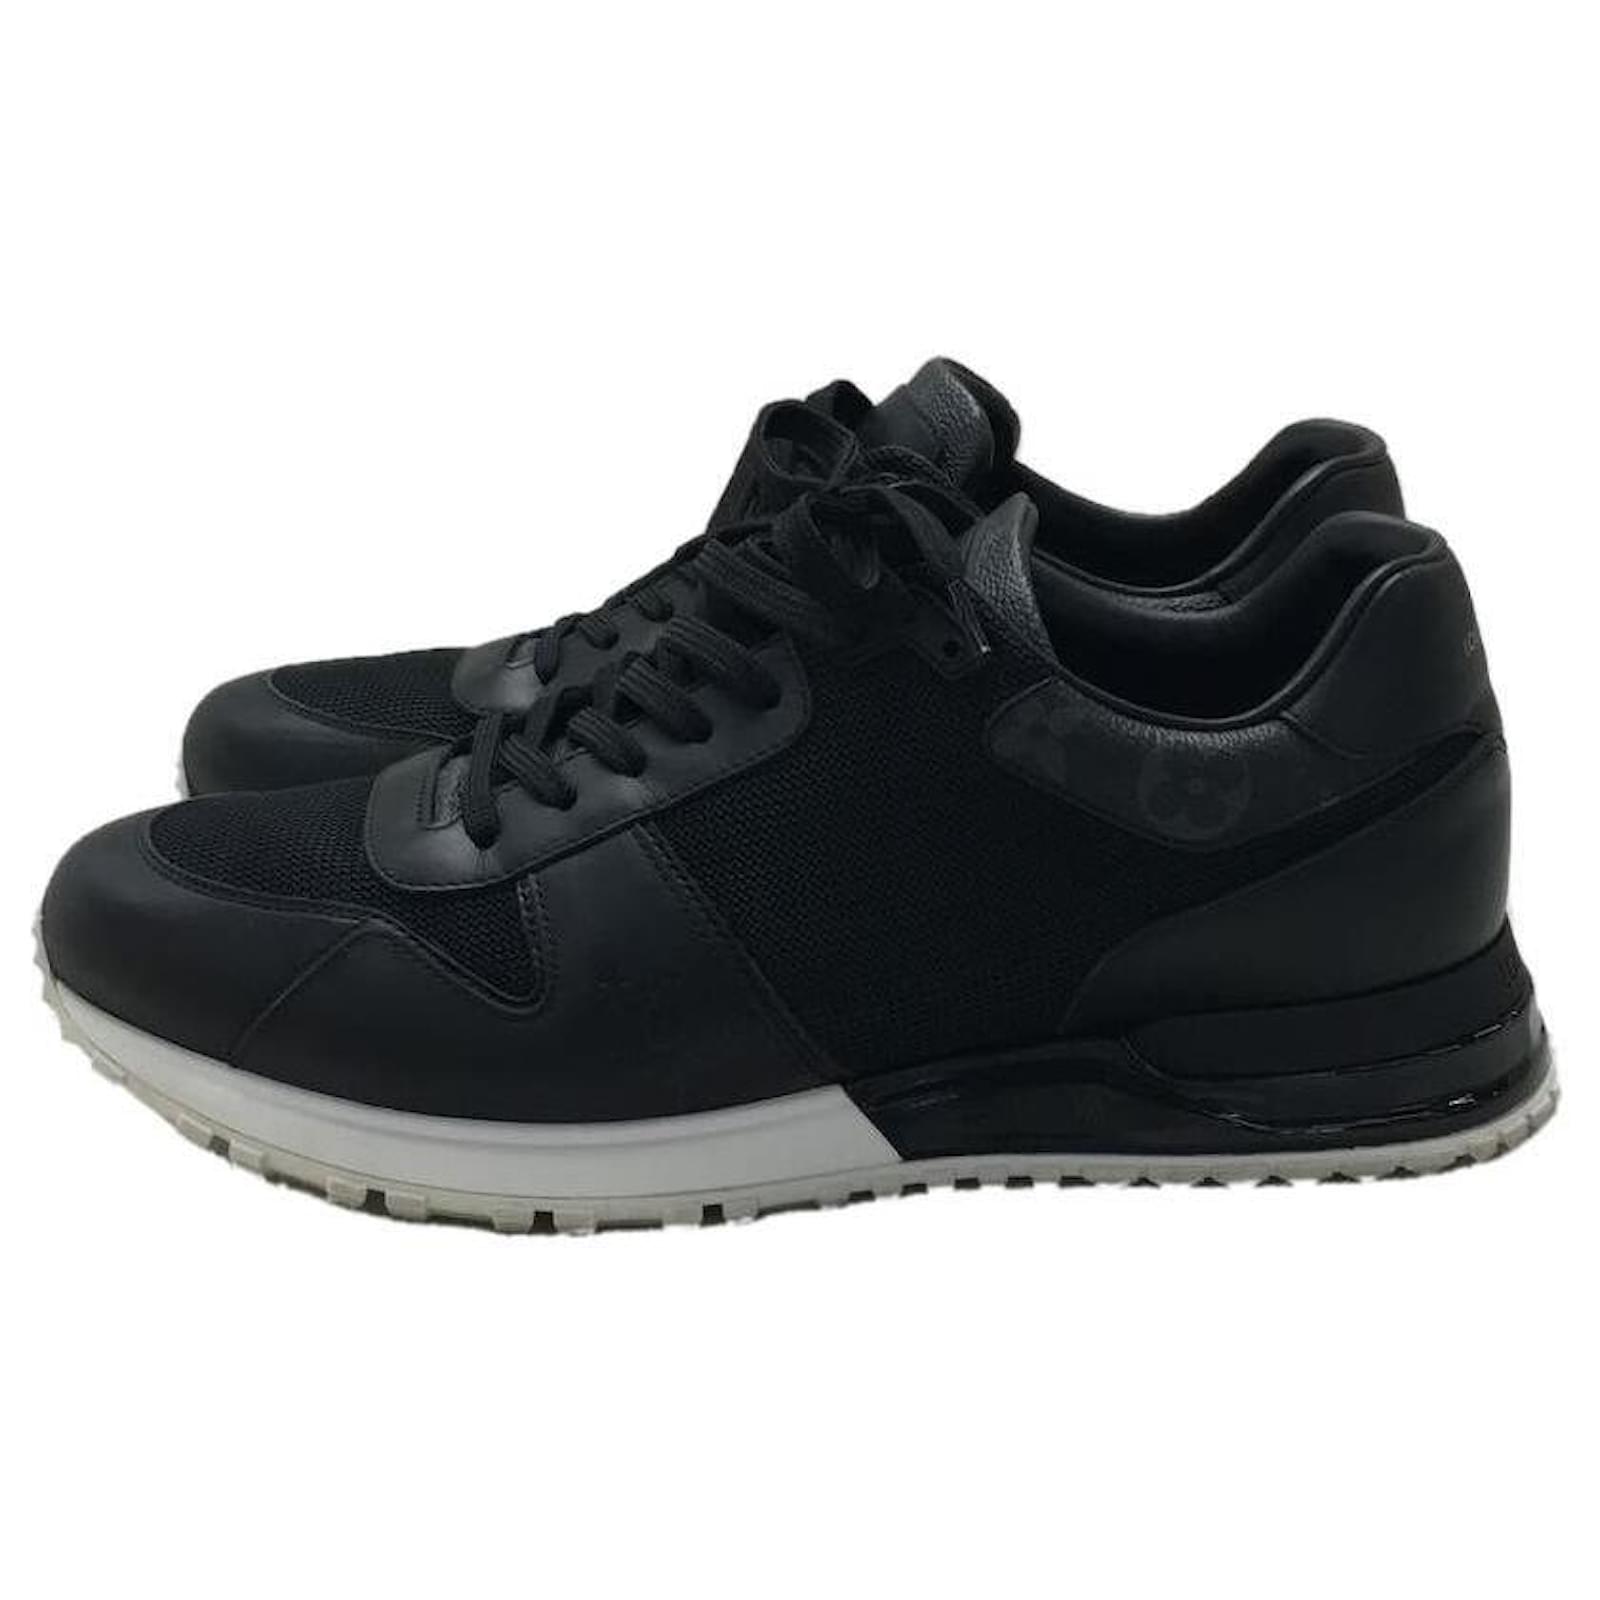 Run Away leather low trainers